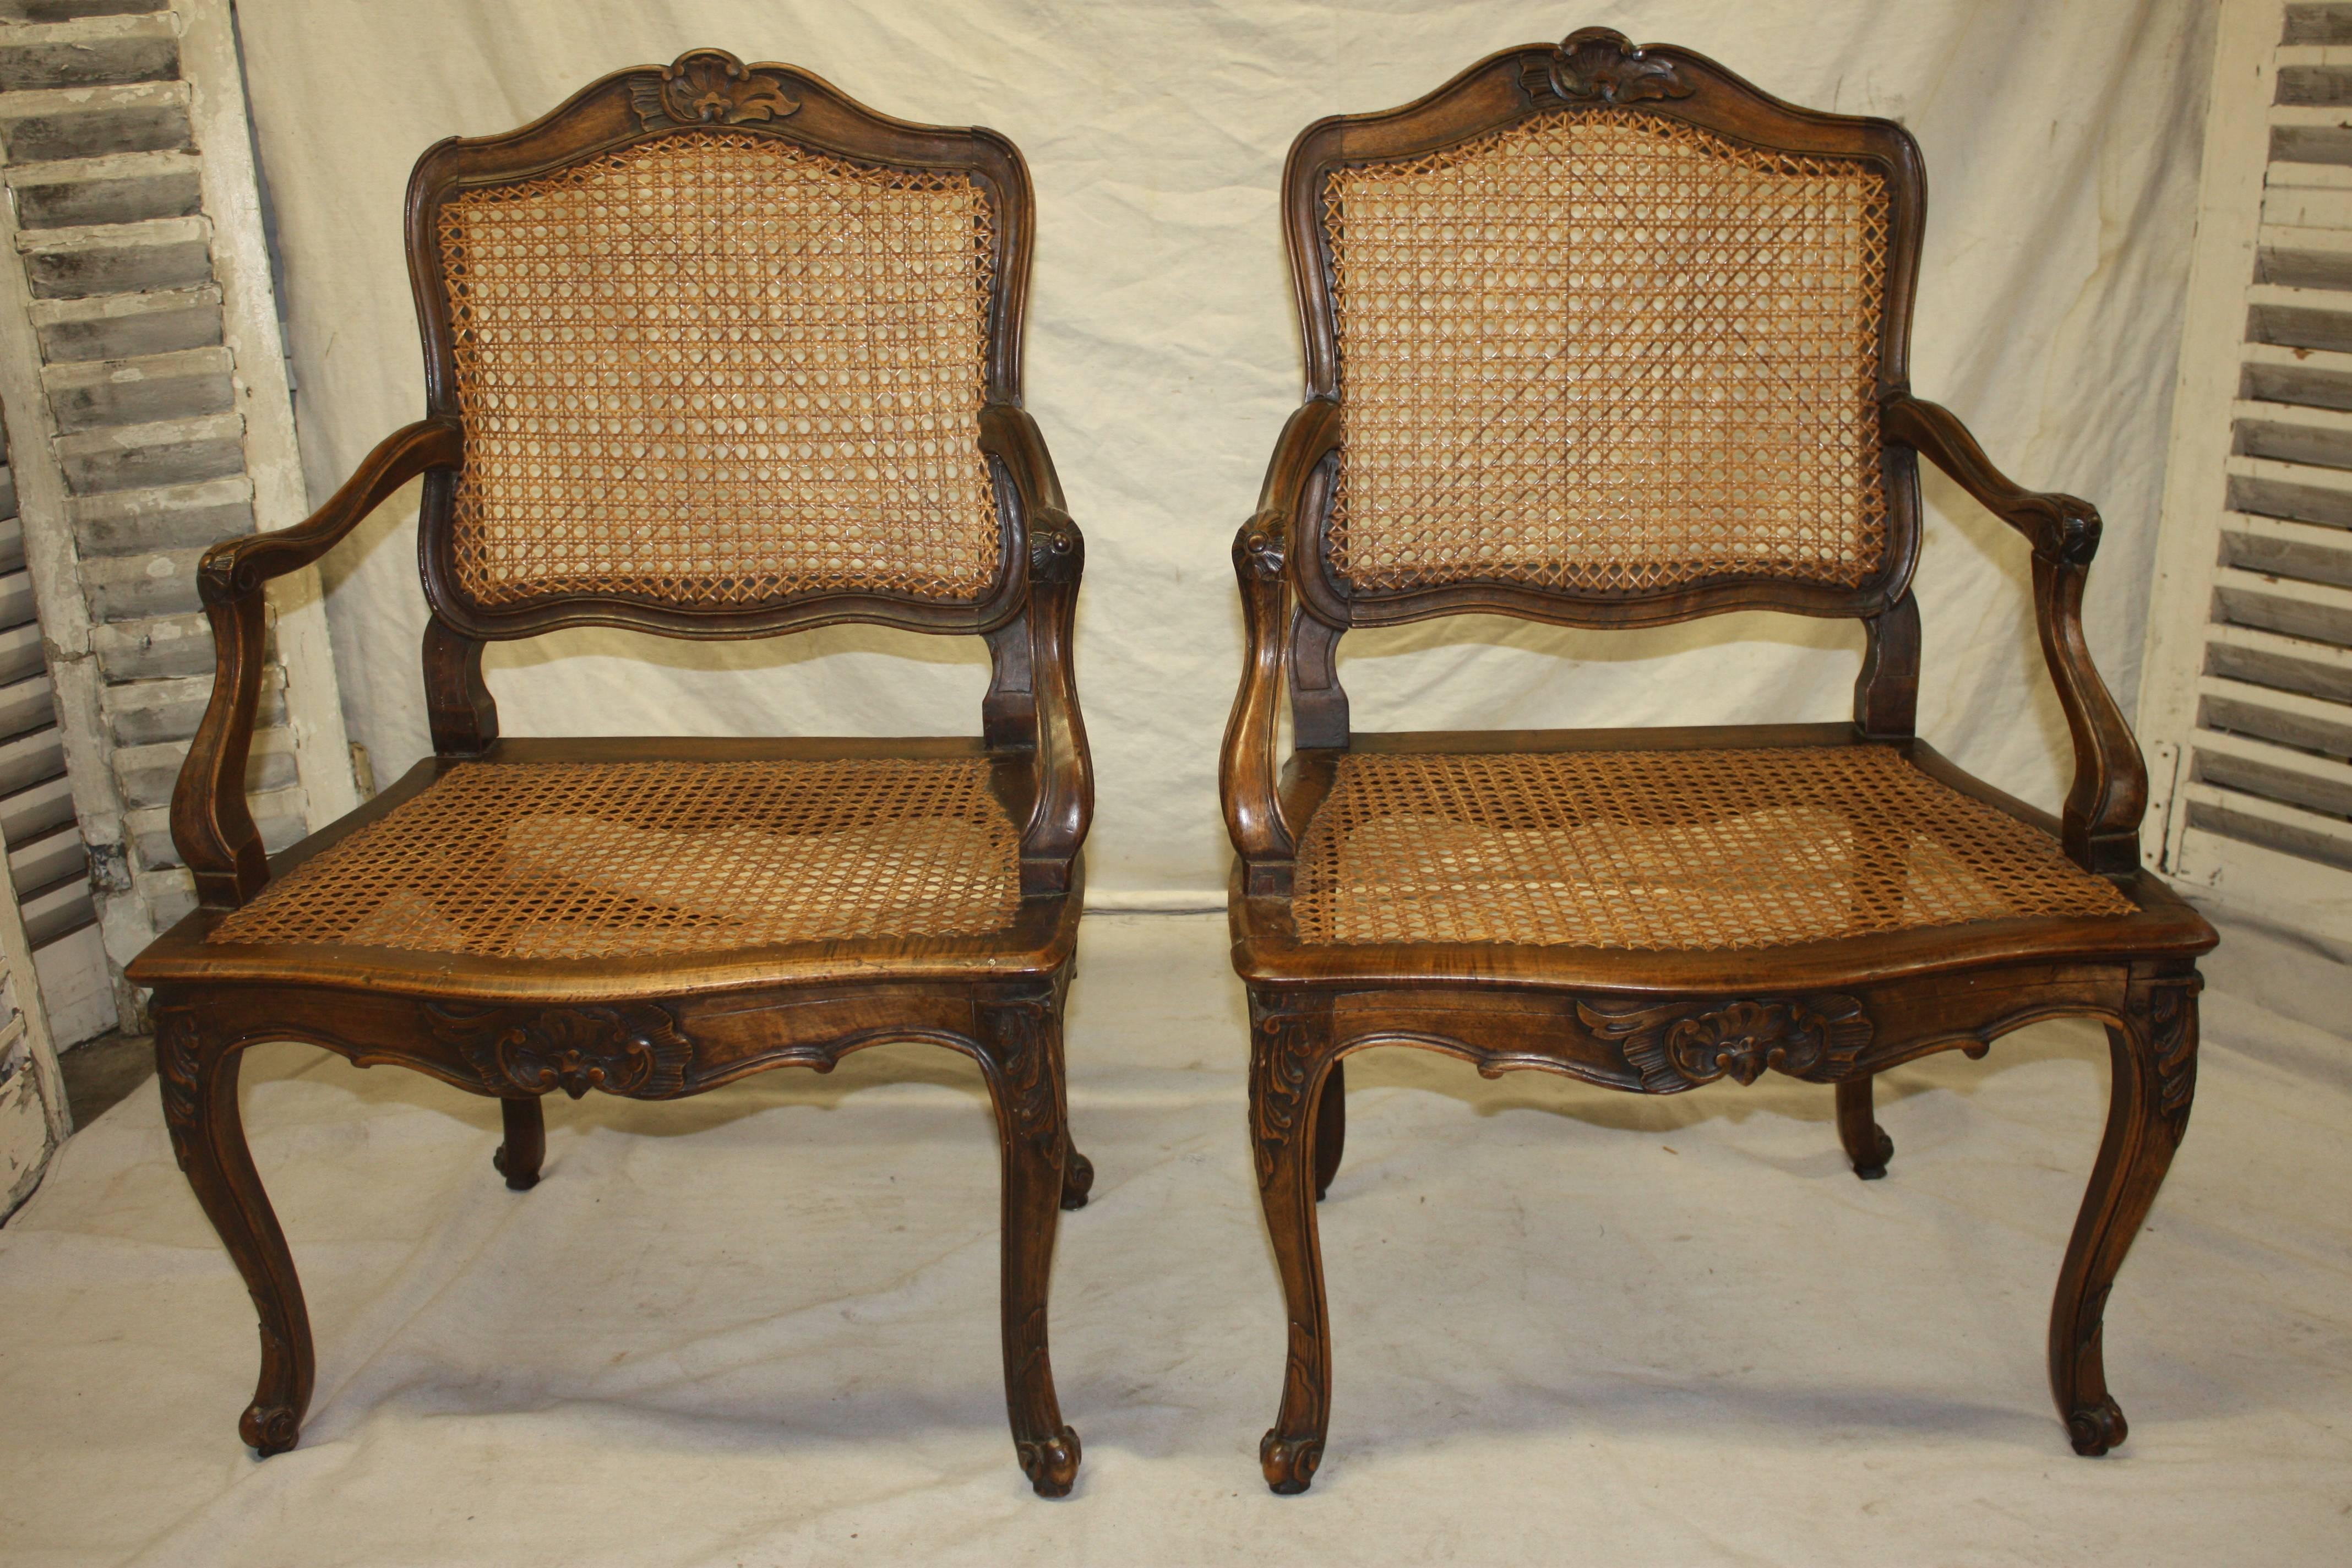 Pair of 18th century caned chairs, French Louis XV period.